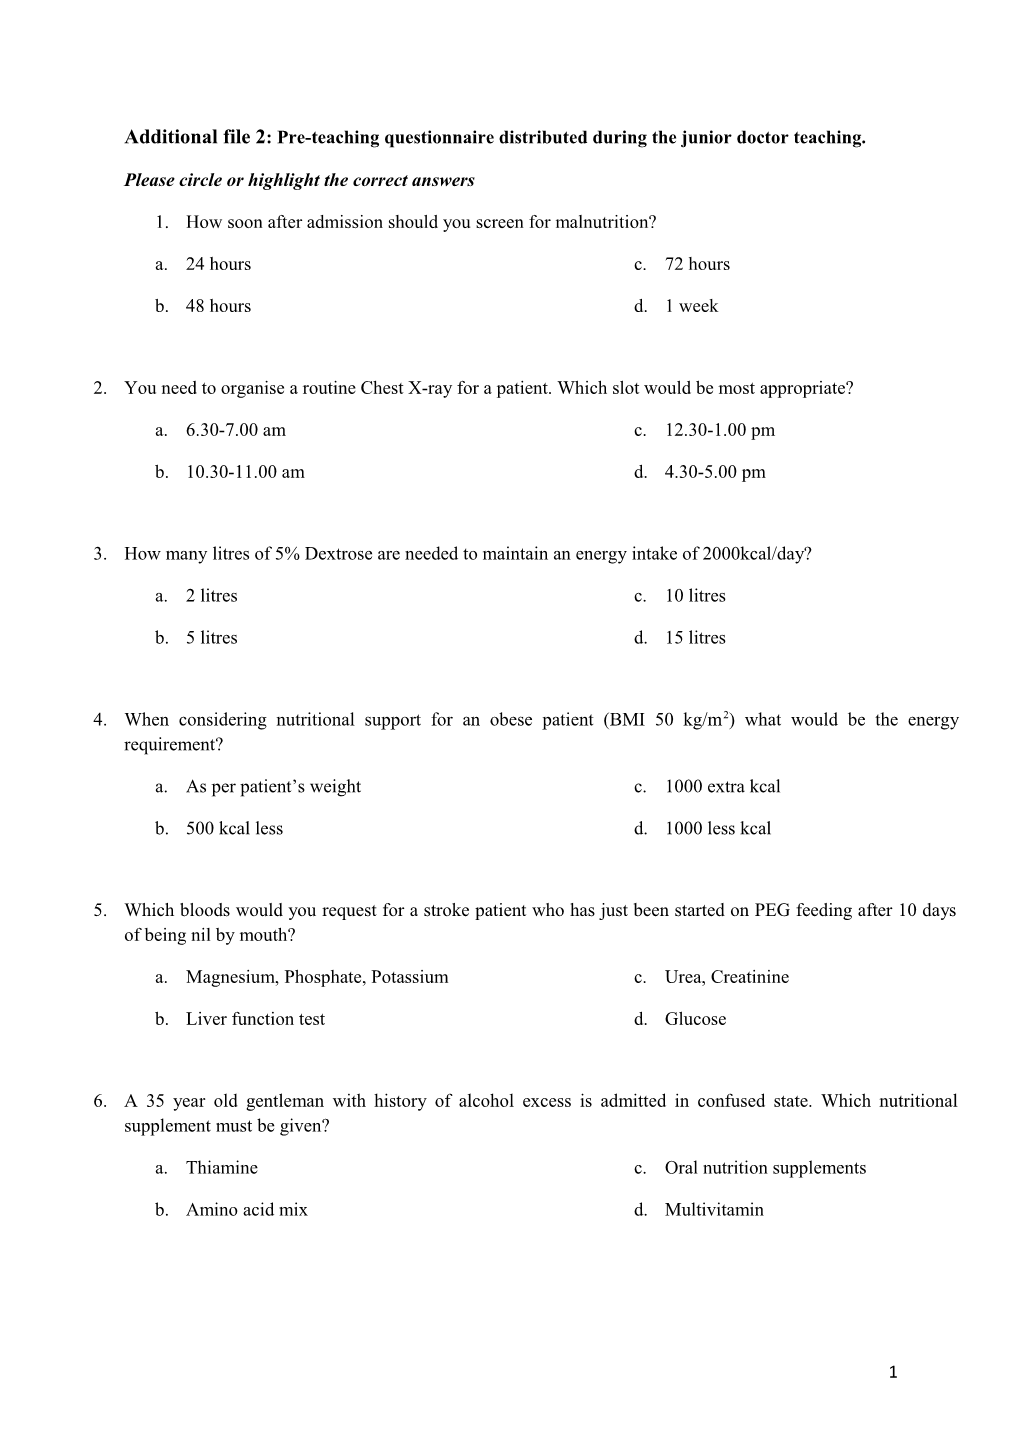 Additional File2: Pre-Teaching Questionnaire Distributed During the Junior Doctor Teaching